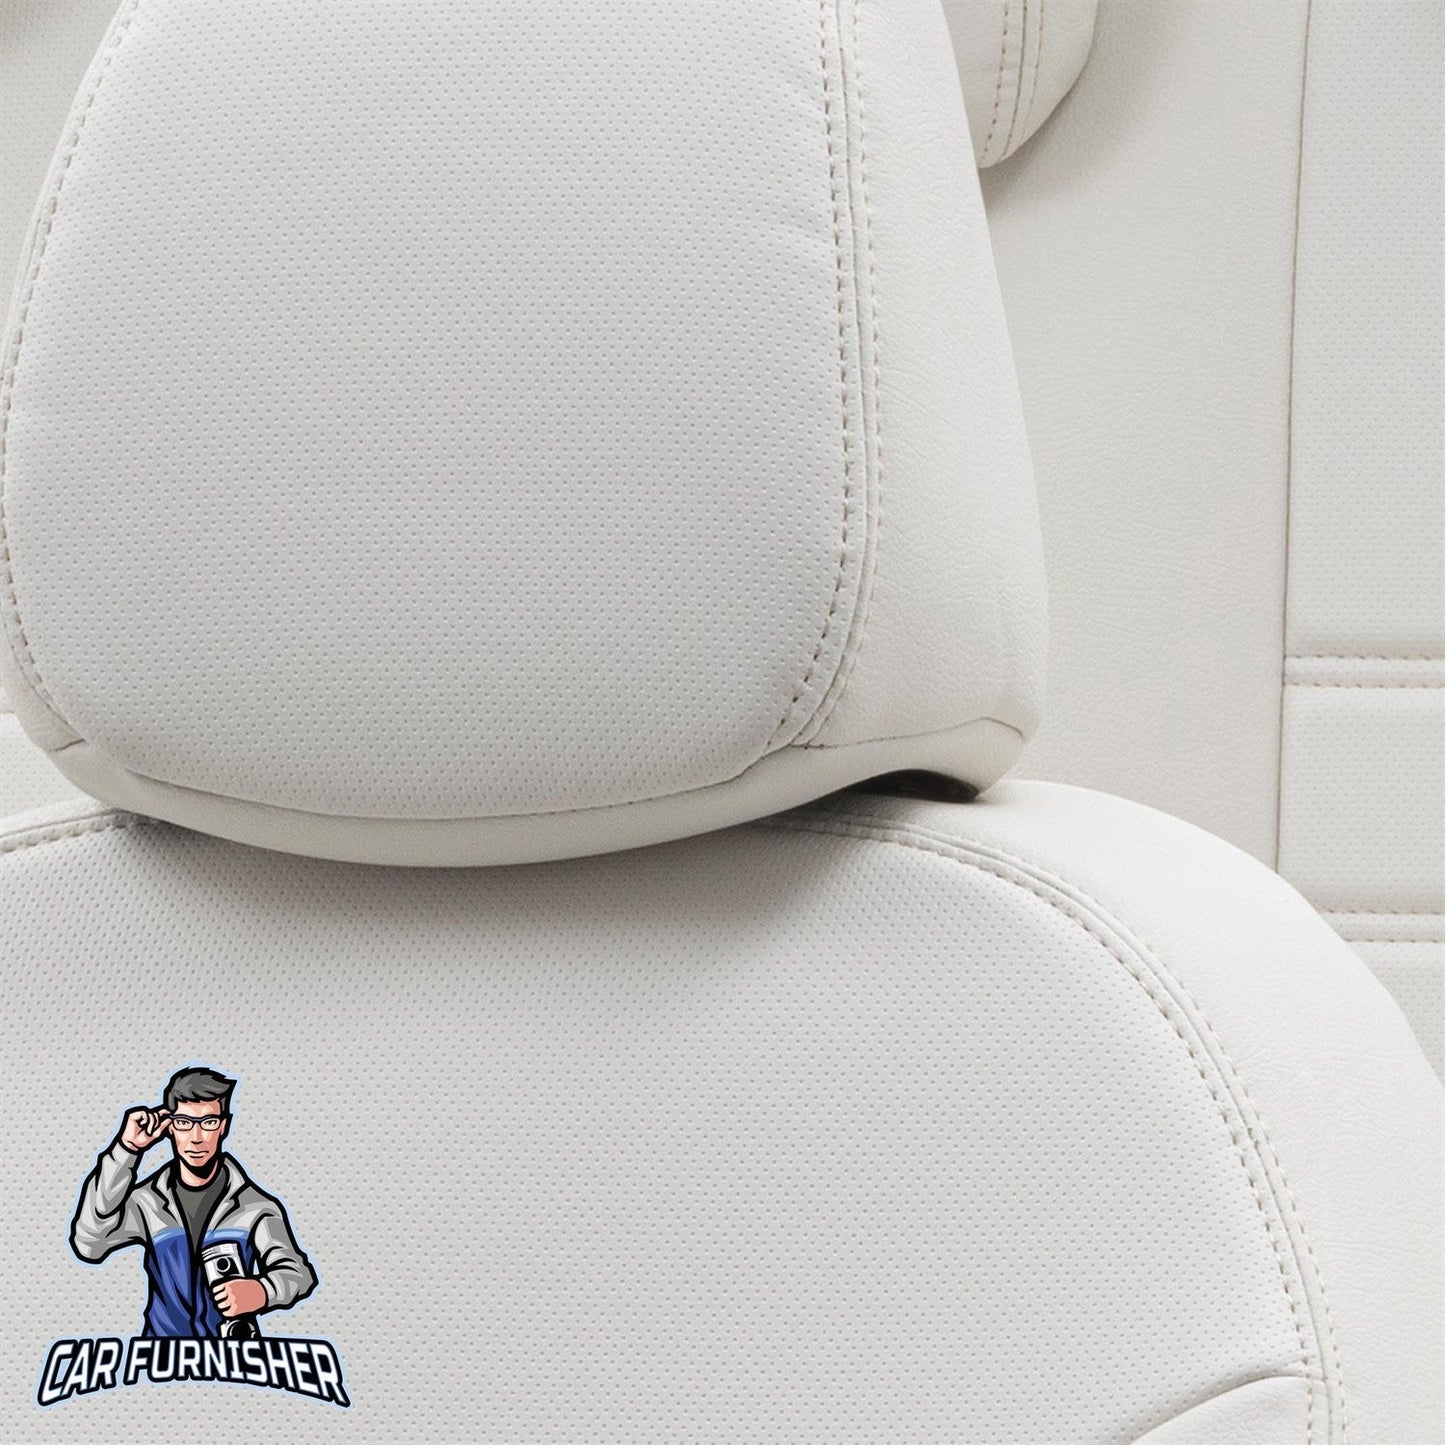 Mazda CX3 Seat Cover Istanbul Leather Design Ivory Leather